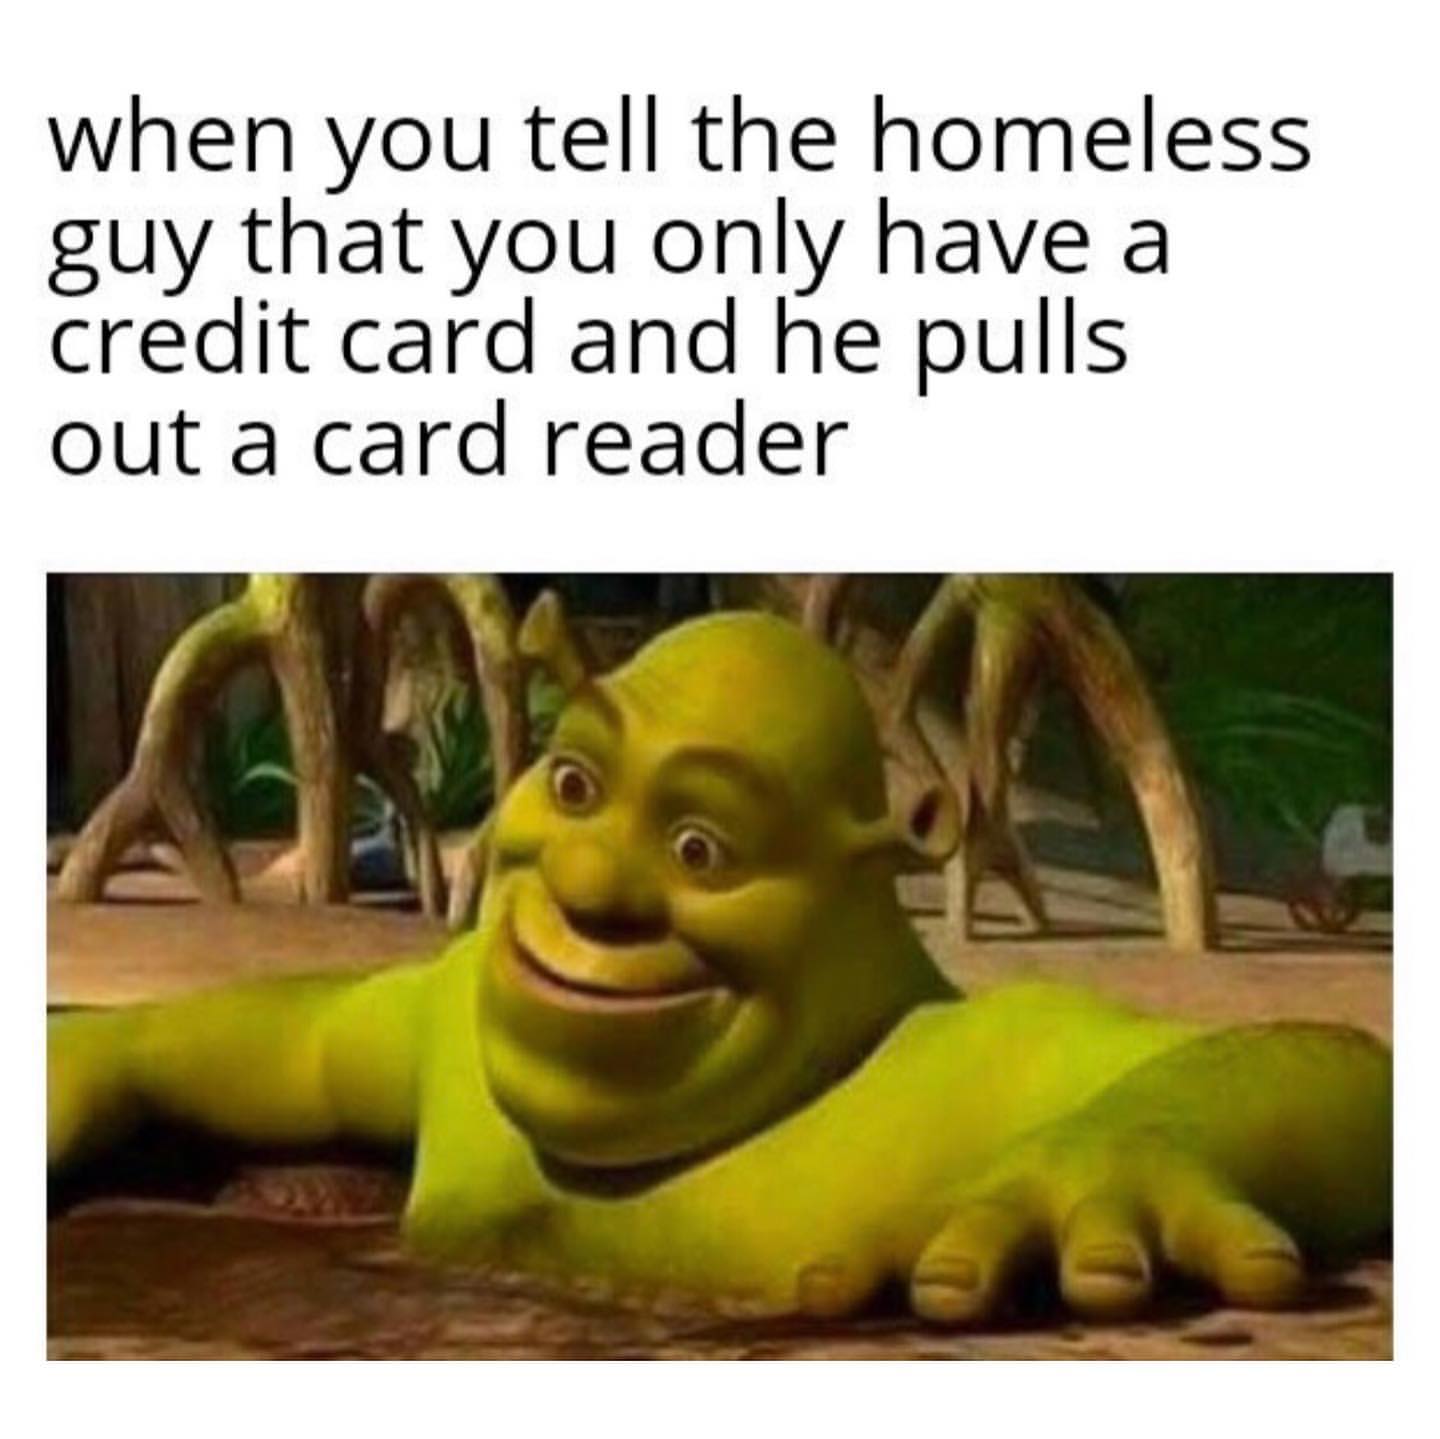 When you tell the homeless guy that you only have a credit card and he pulls out a card reader.